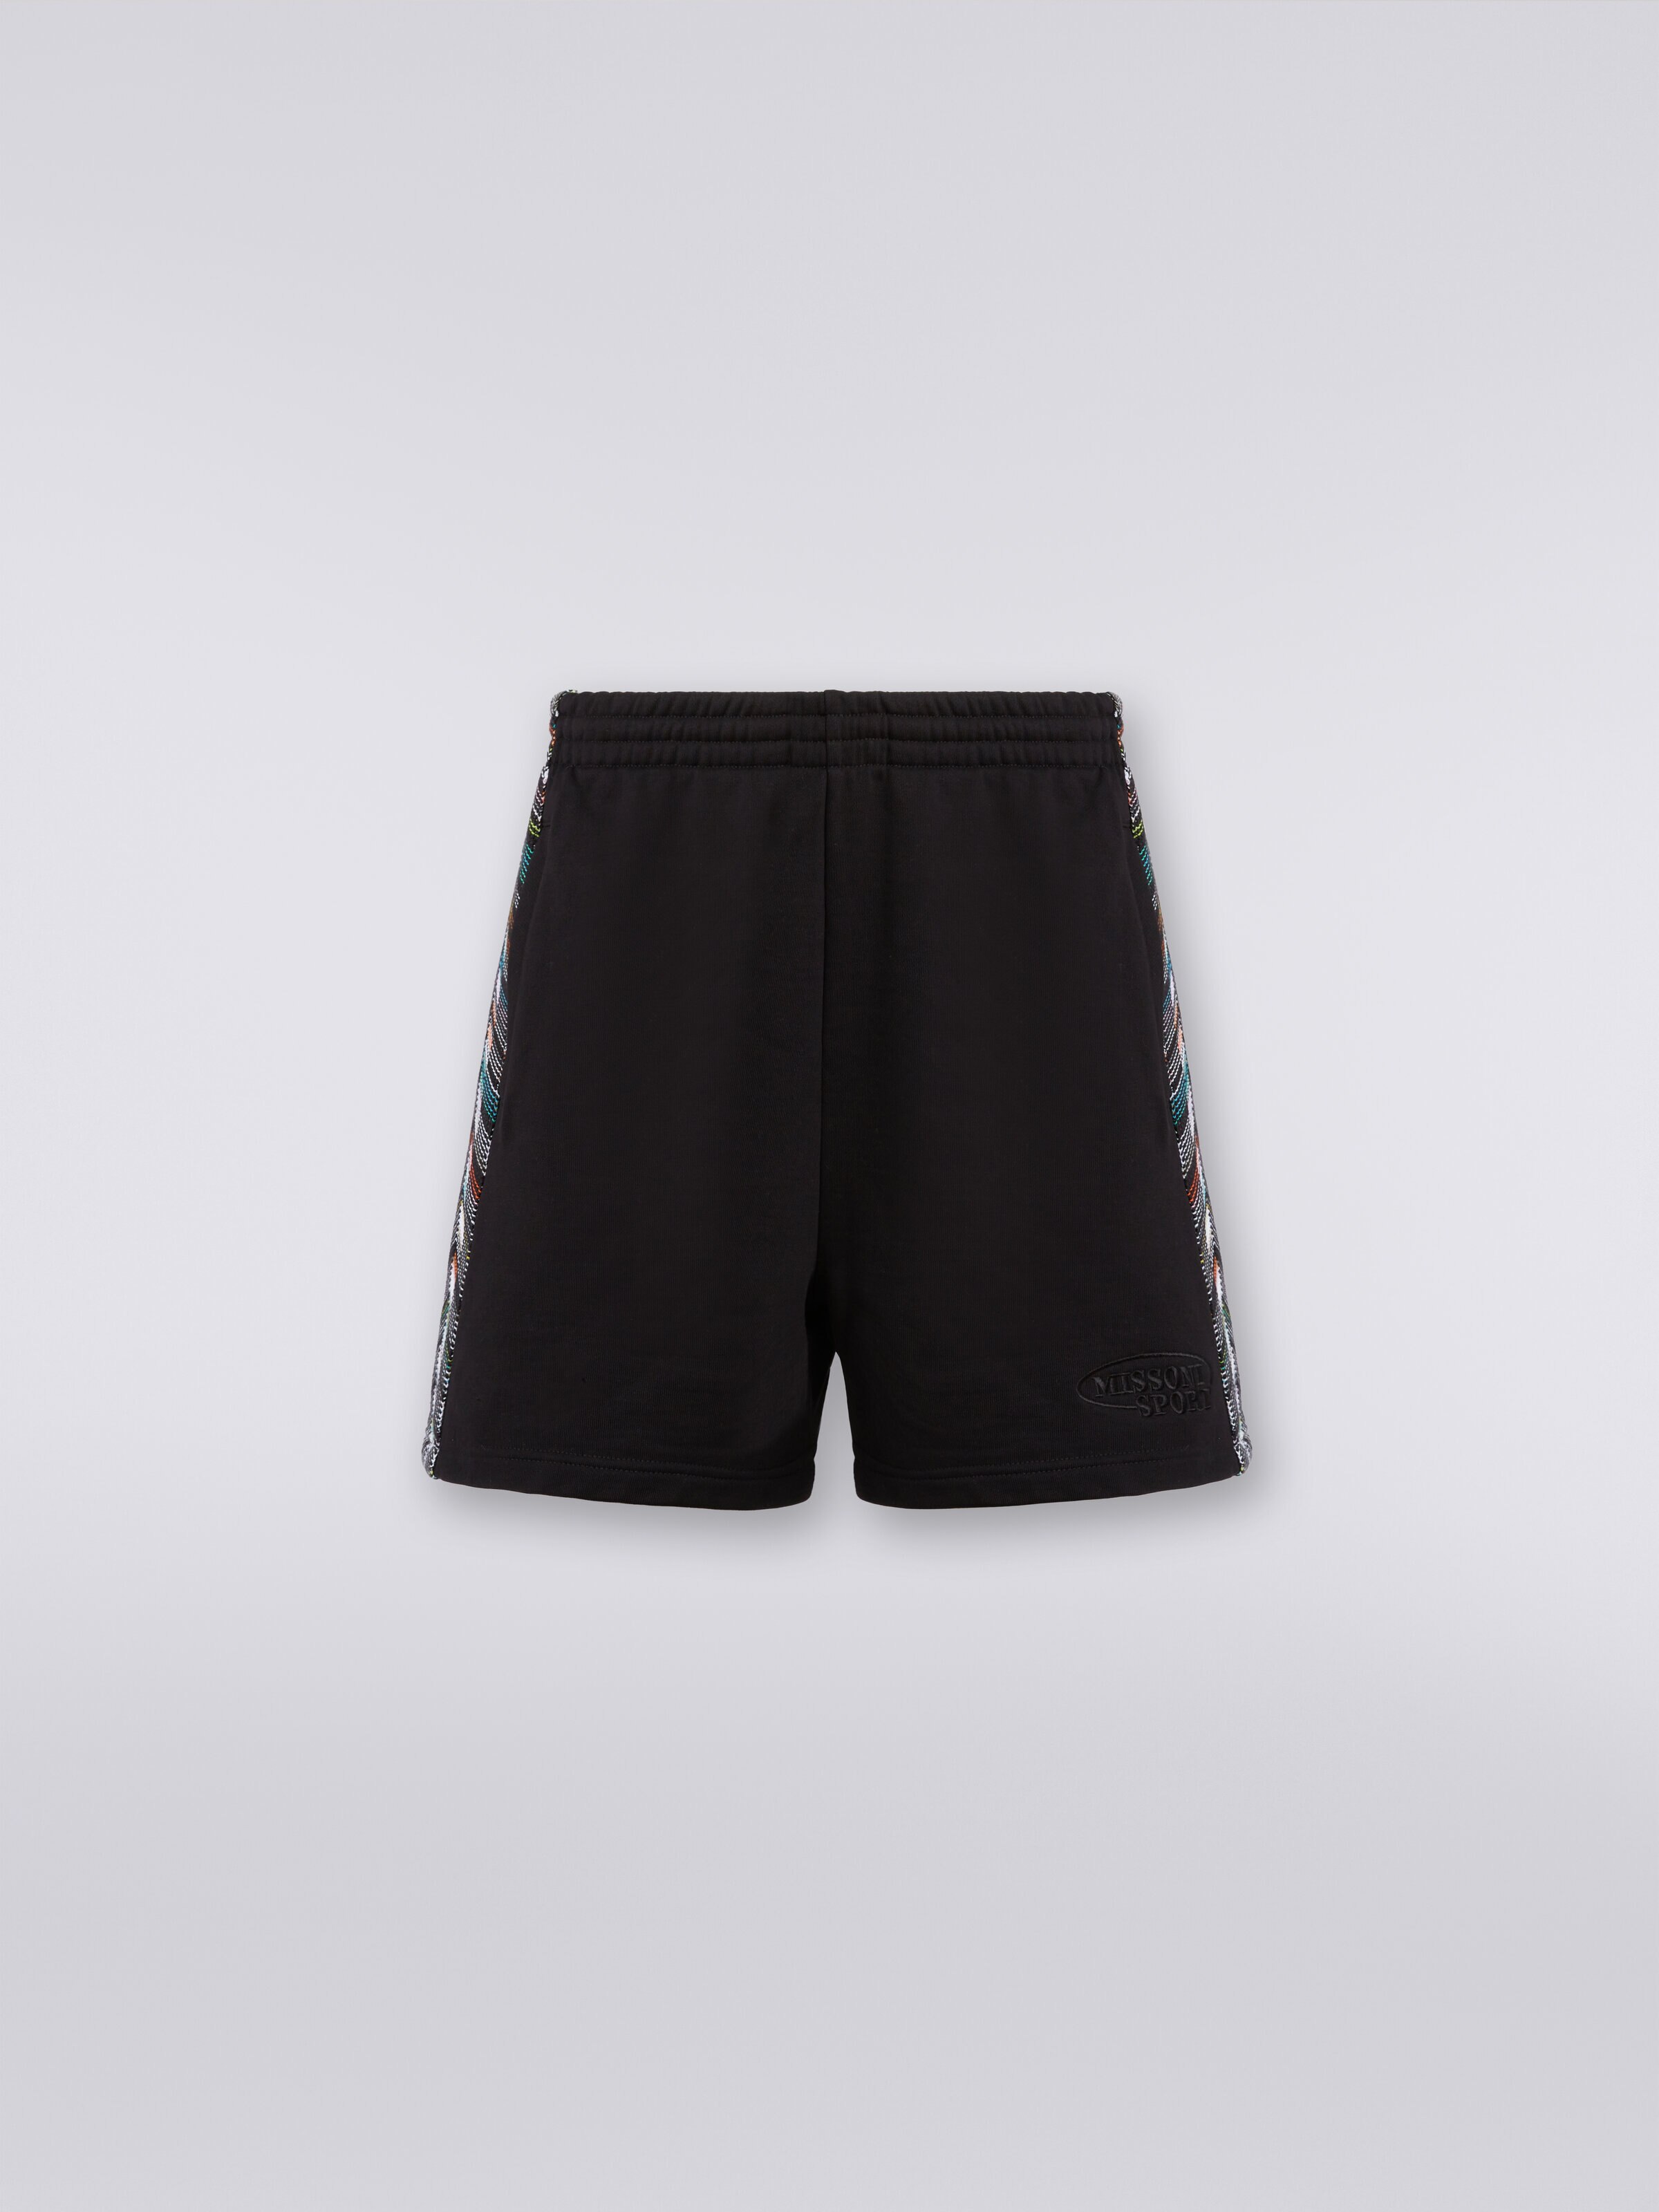 Shorts in fleece with logo and knitted side bands, Black    - 0